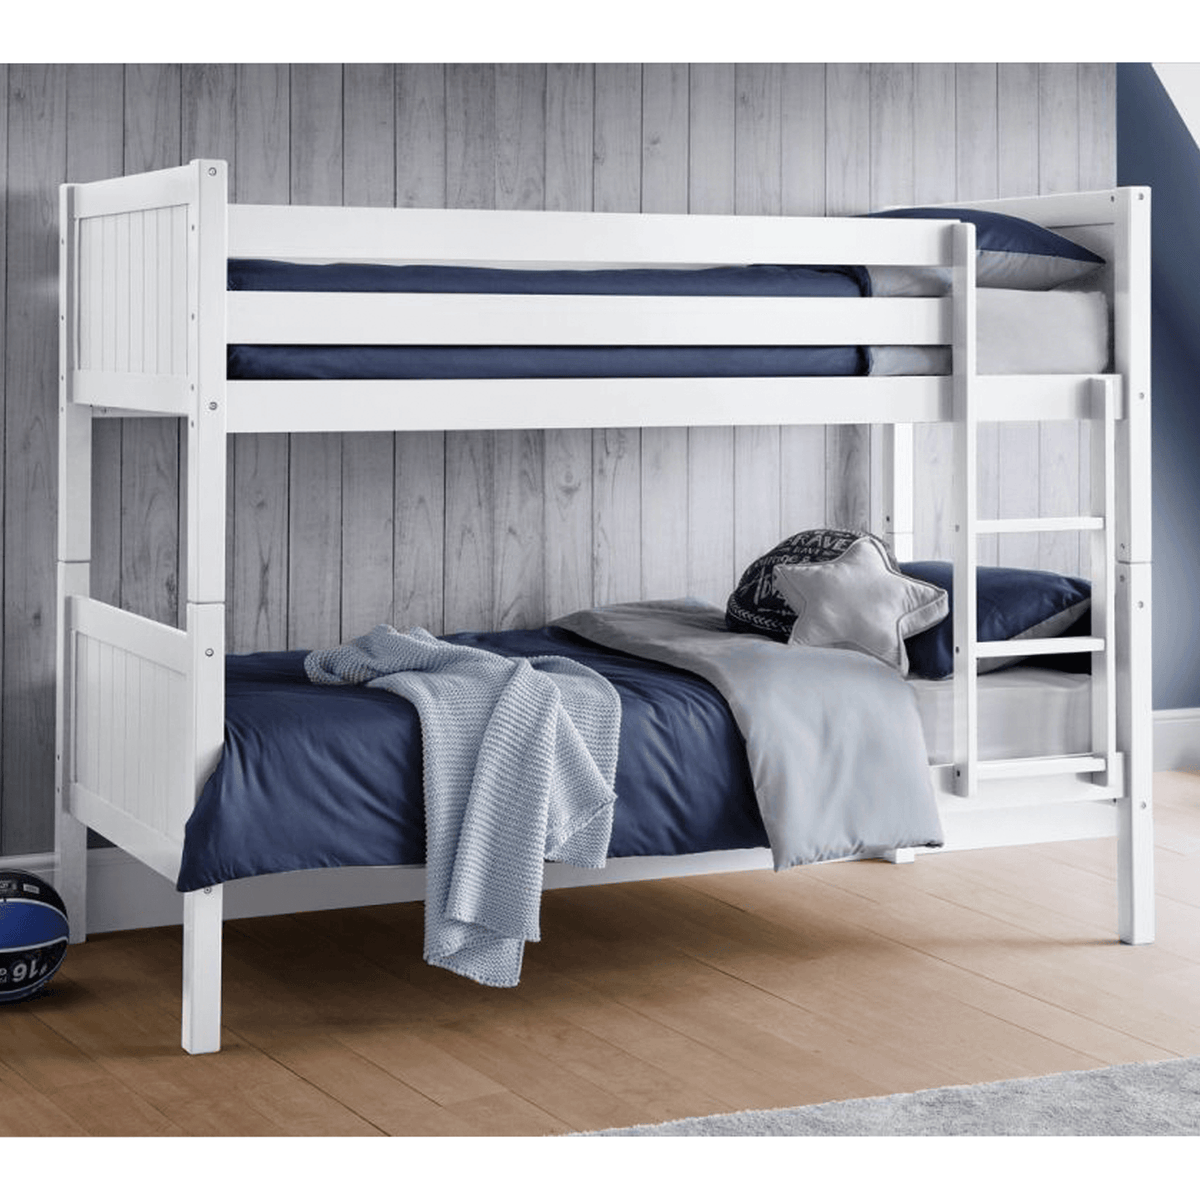 Wooden Single Bunk Bed